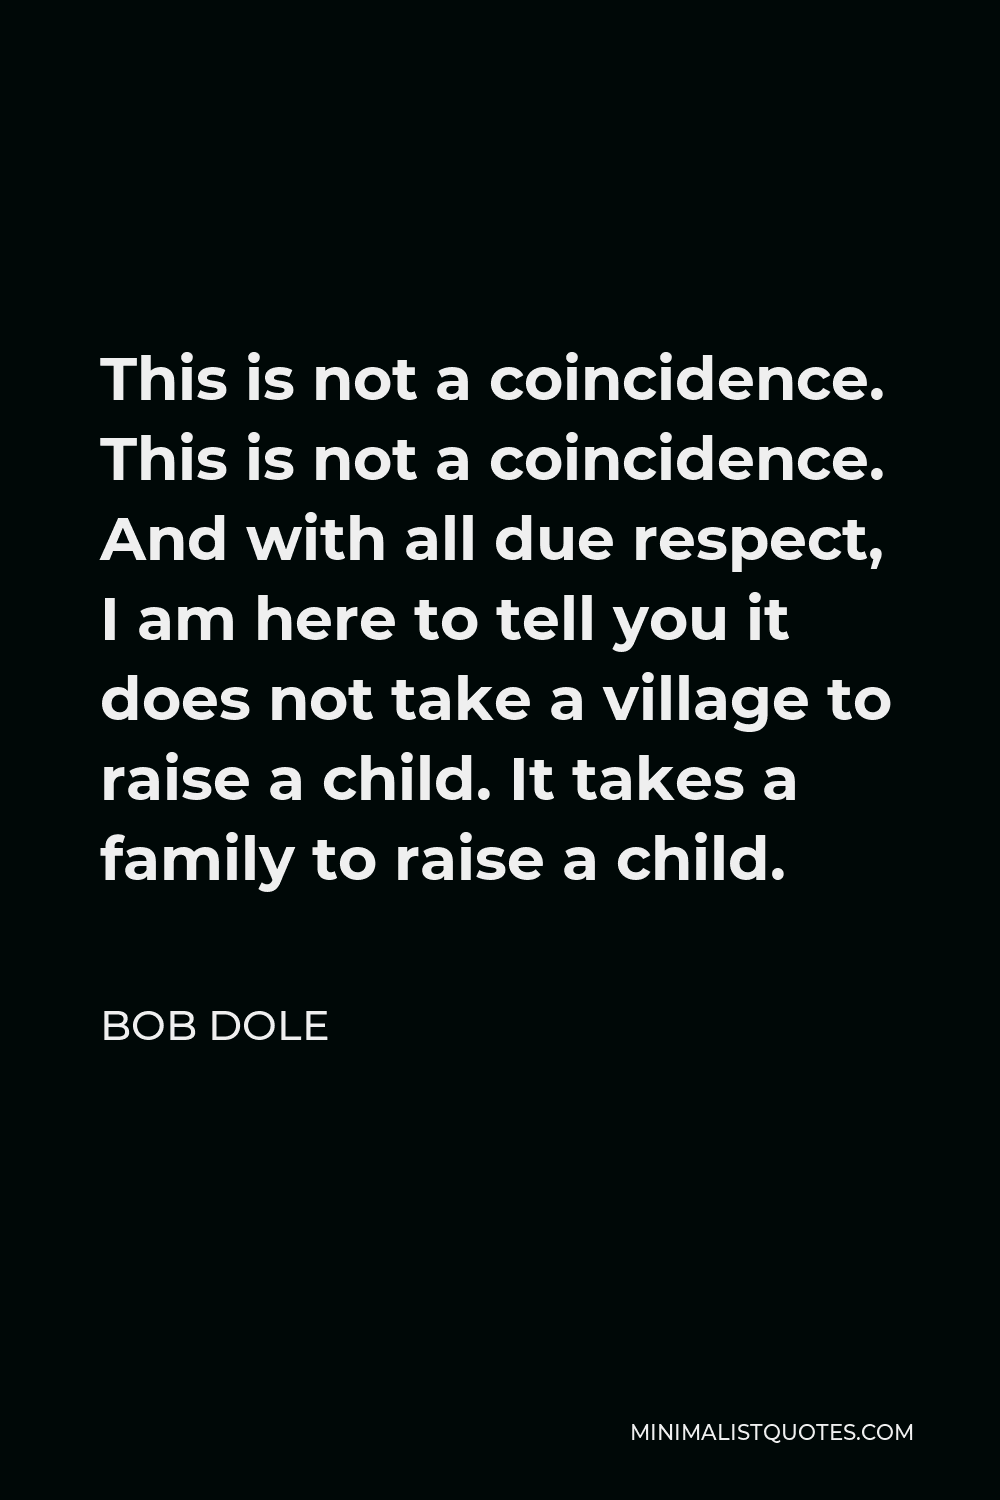 Bob Dole Quote - This is not a coincidence. This is not a coincidence. And with all due respect, I am here to tell you it does not take a village to raise a child. It takes a family to raise a child.